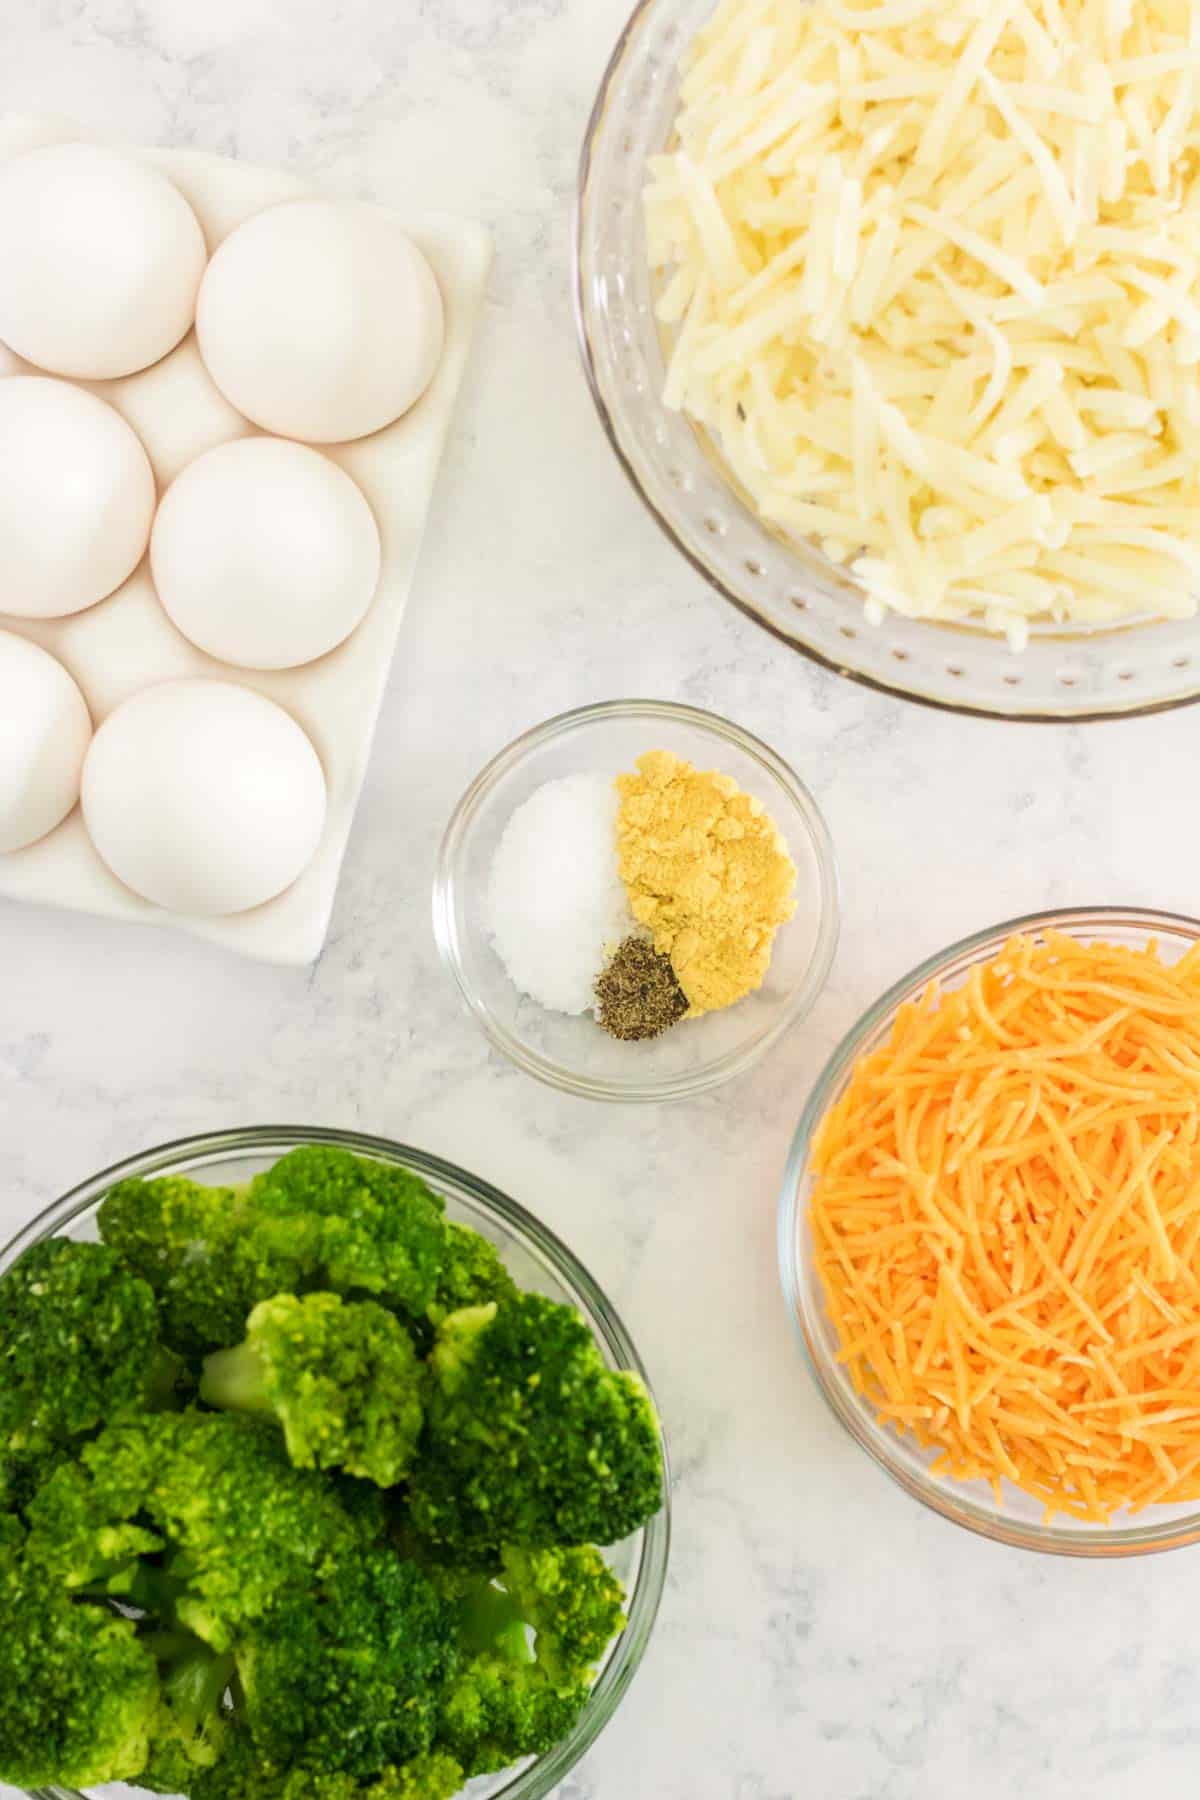 a carton of eggs with bowls of cooked broccoli, shredded cheese, shredded potatoes, and spices on a marble tabletop